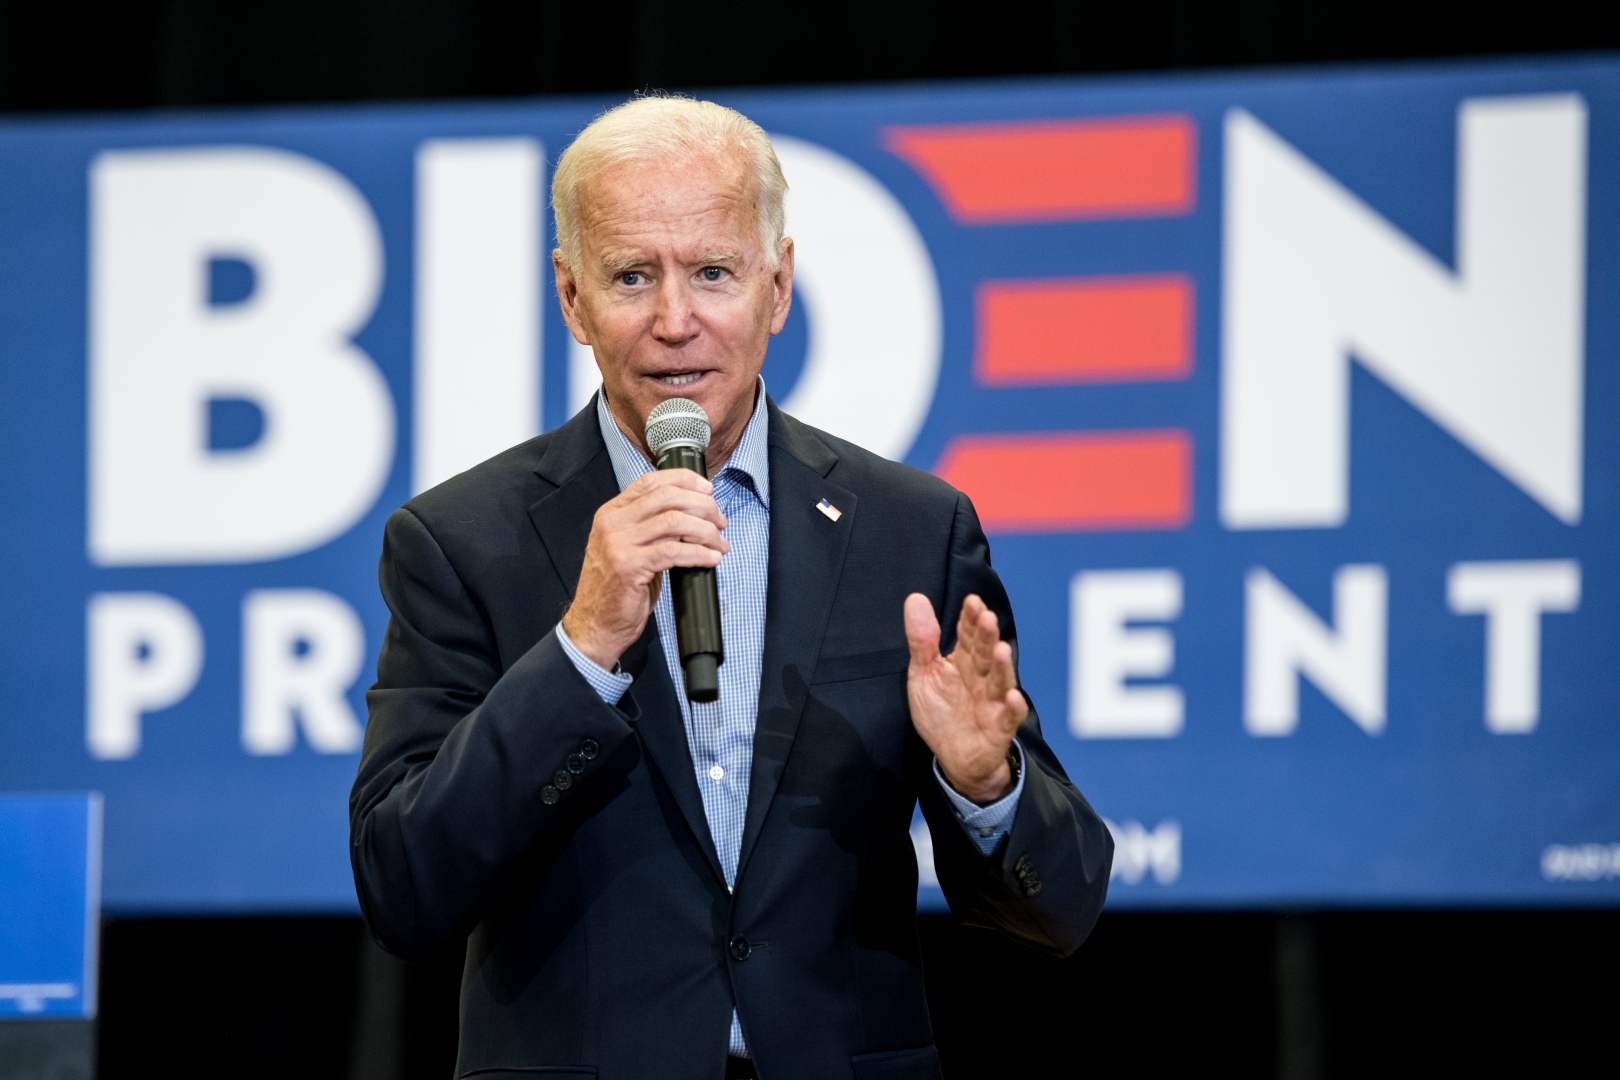 In the likely rematch between President Biden and former President Trump in the 2024 presidential race, age will be a popular topic of debate.